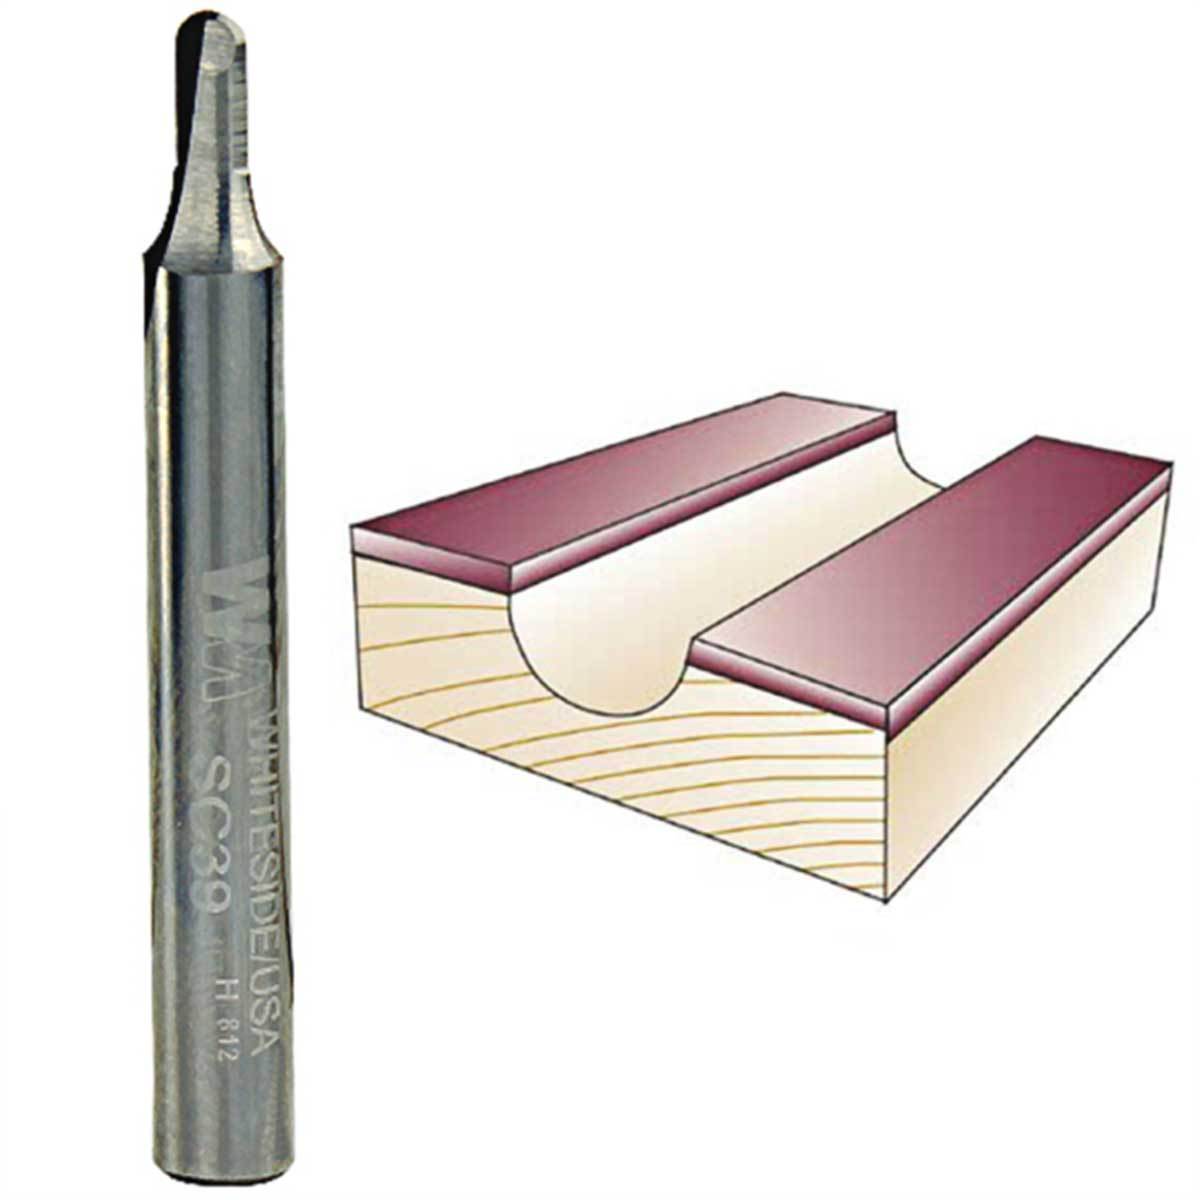 Ultimate Tools Whiteside Veining Router Bits - Solid Carbide - 1/4" Shank